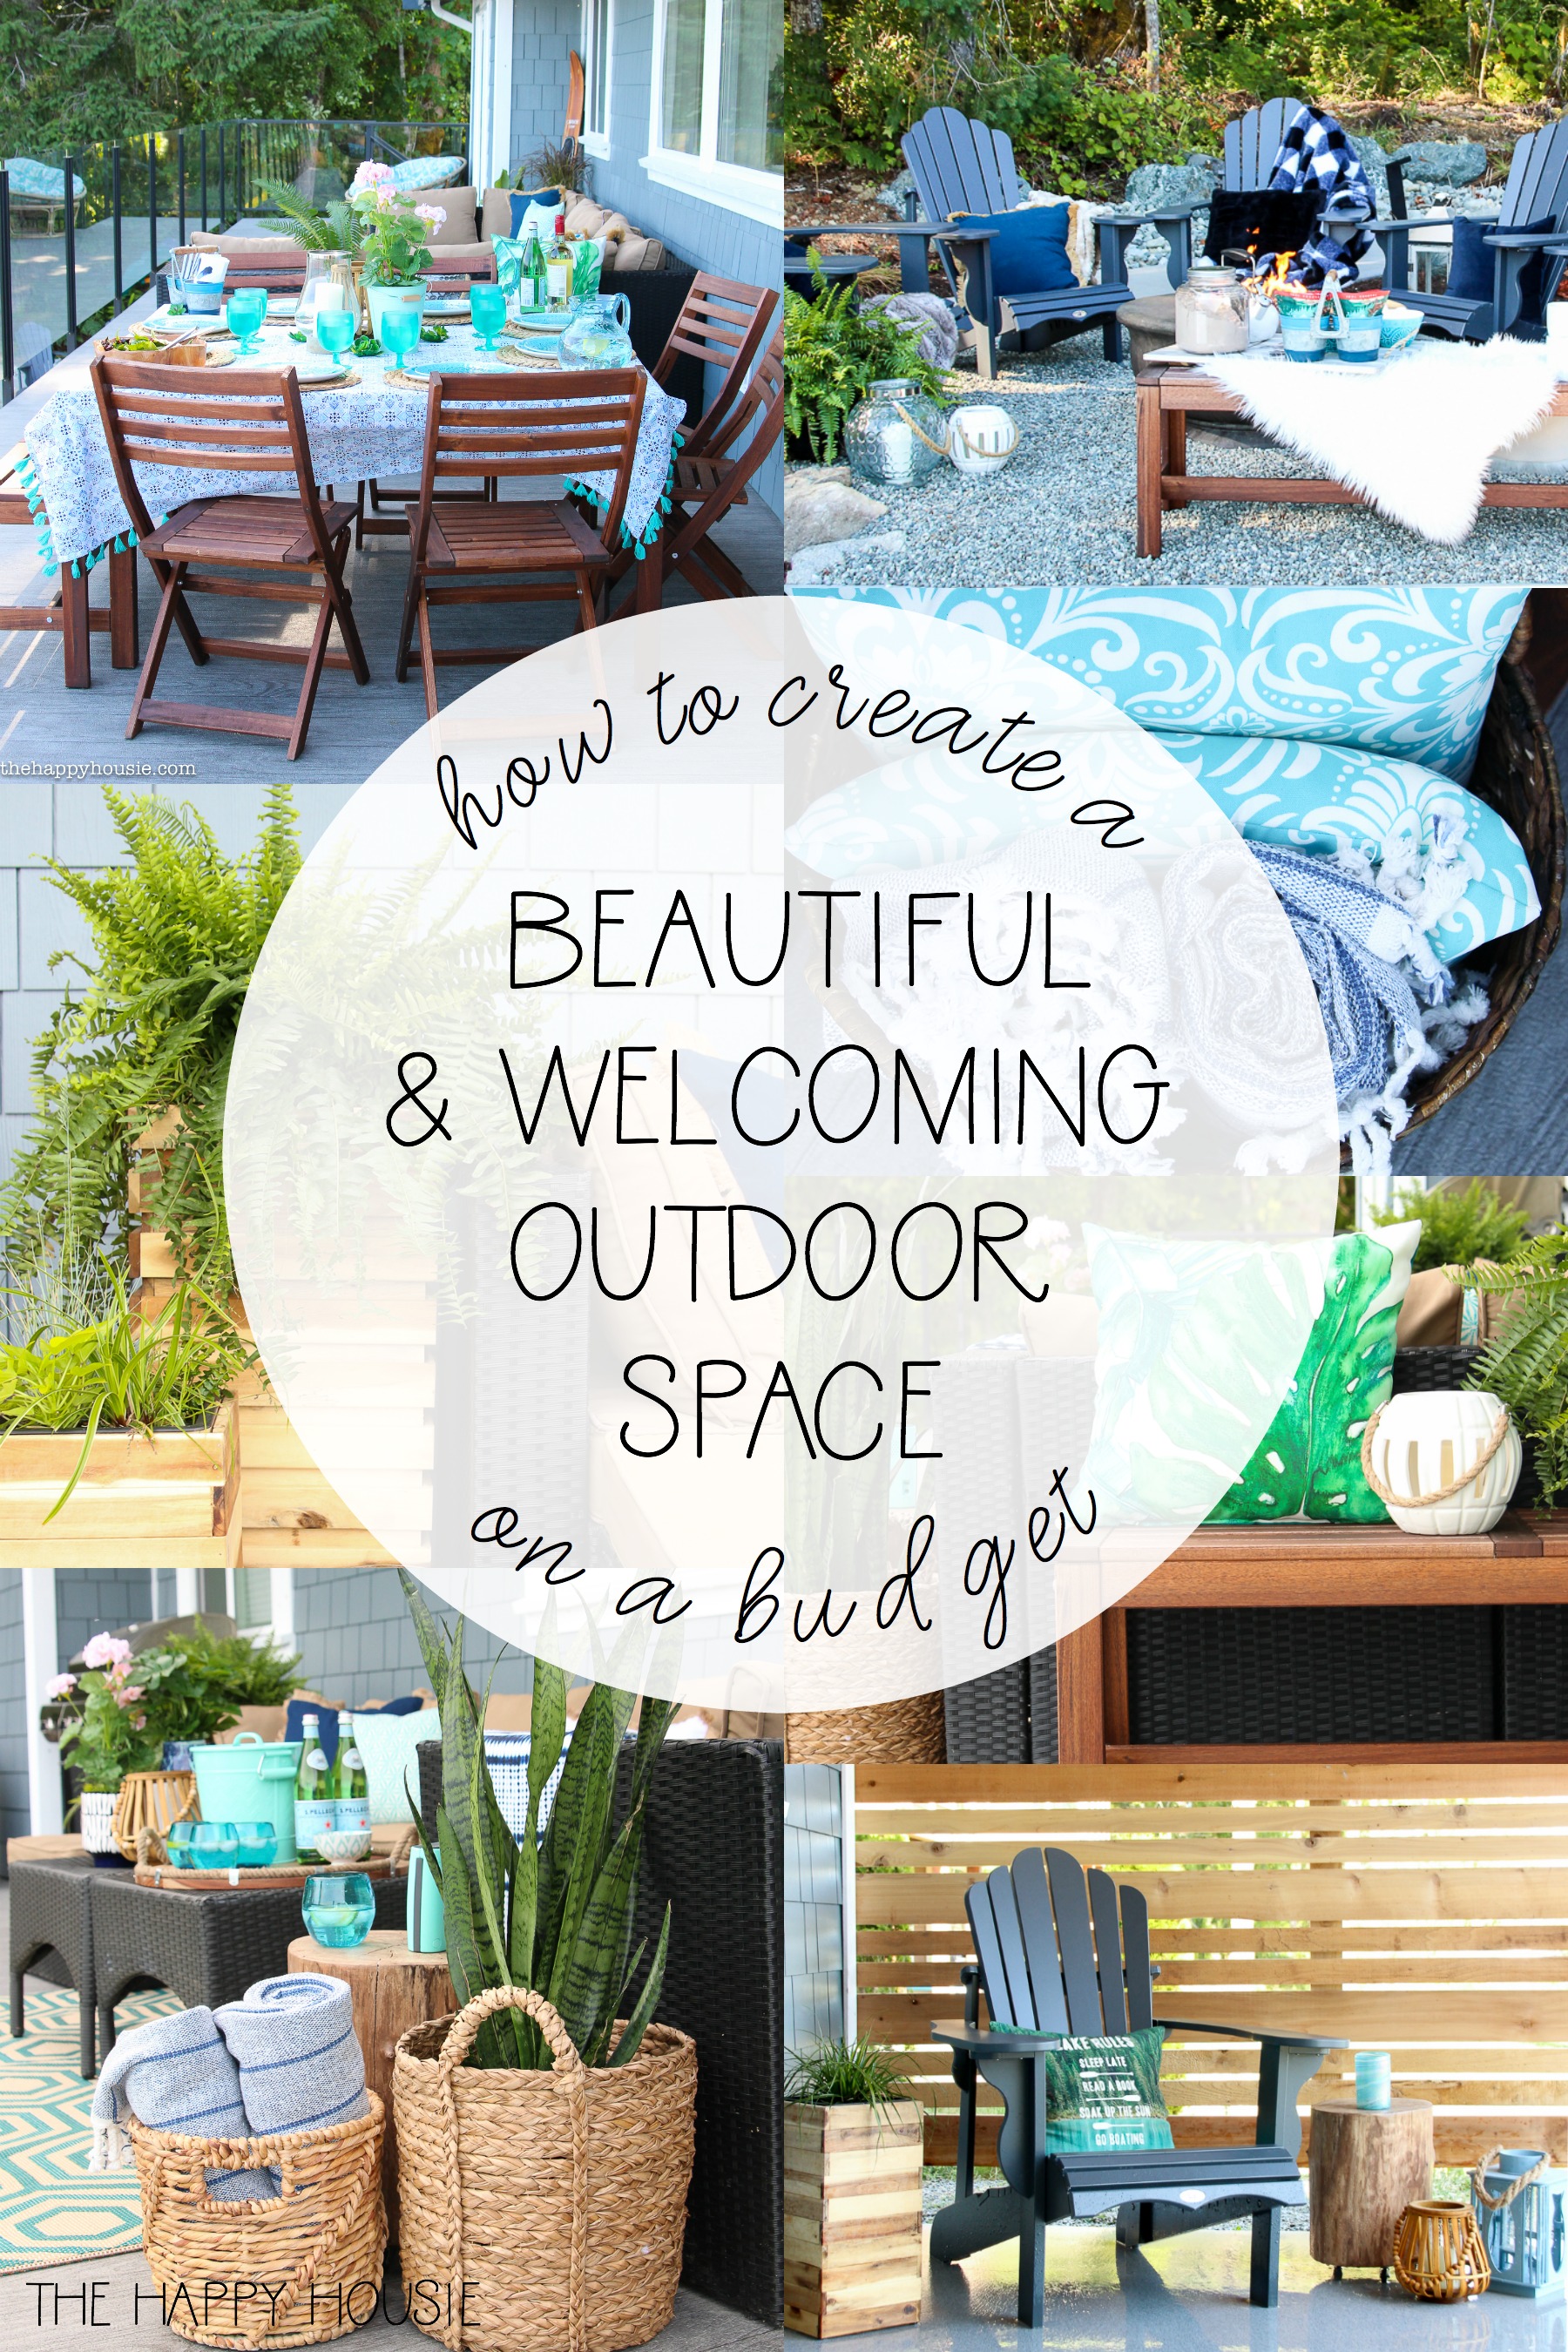 How to create a beautiful and welcoming outdoor space on a budget graphic.